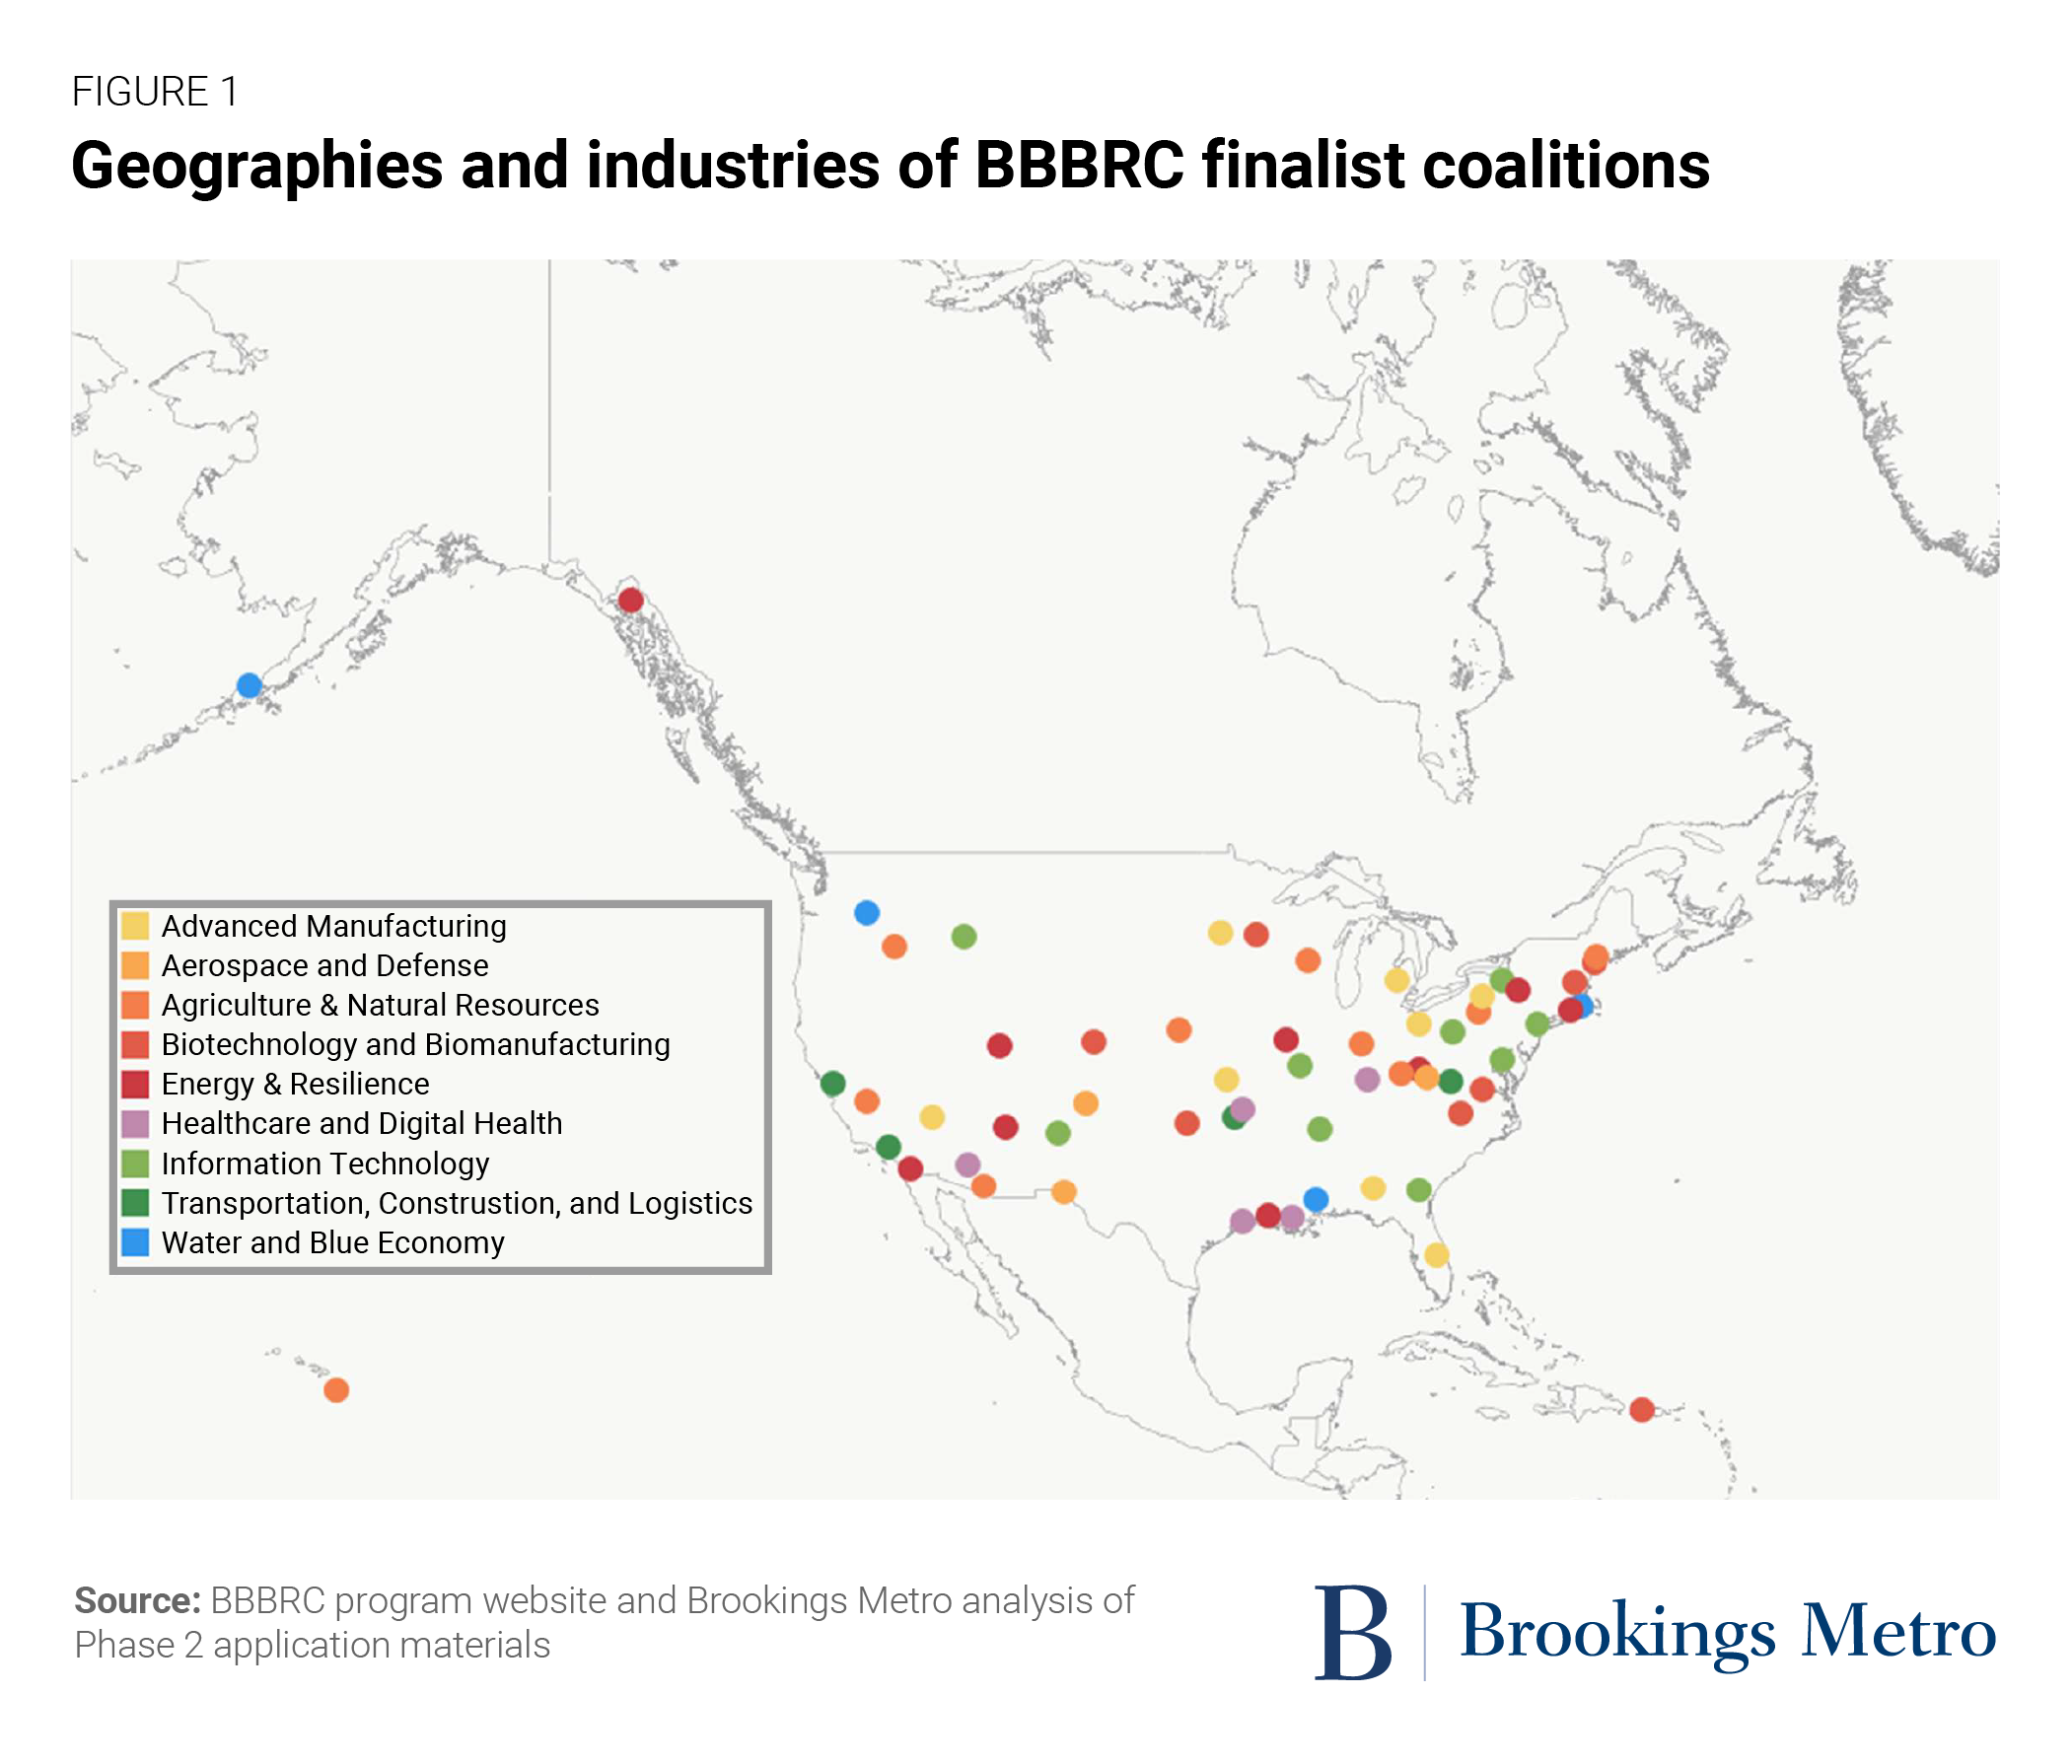 Geographies and industries of BBBRC finalist coalitions